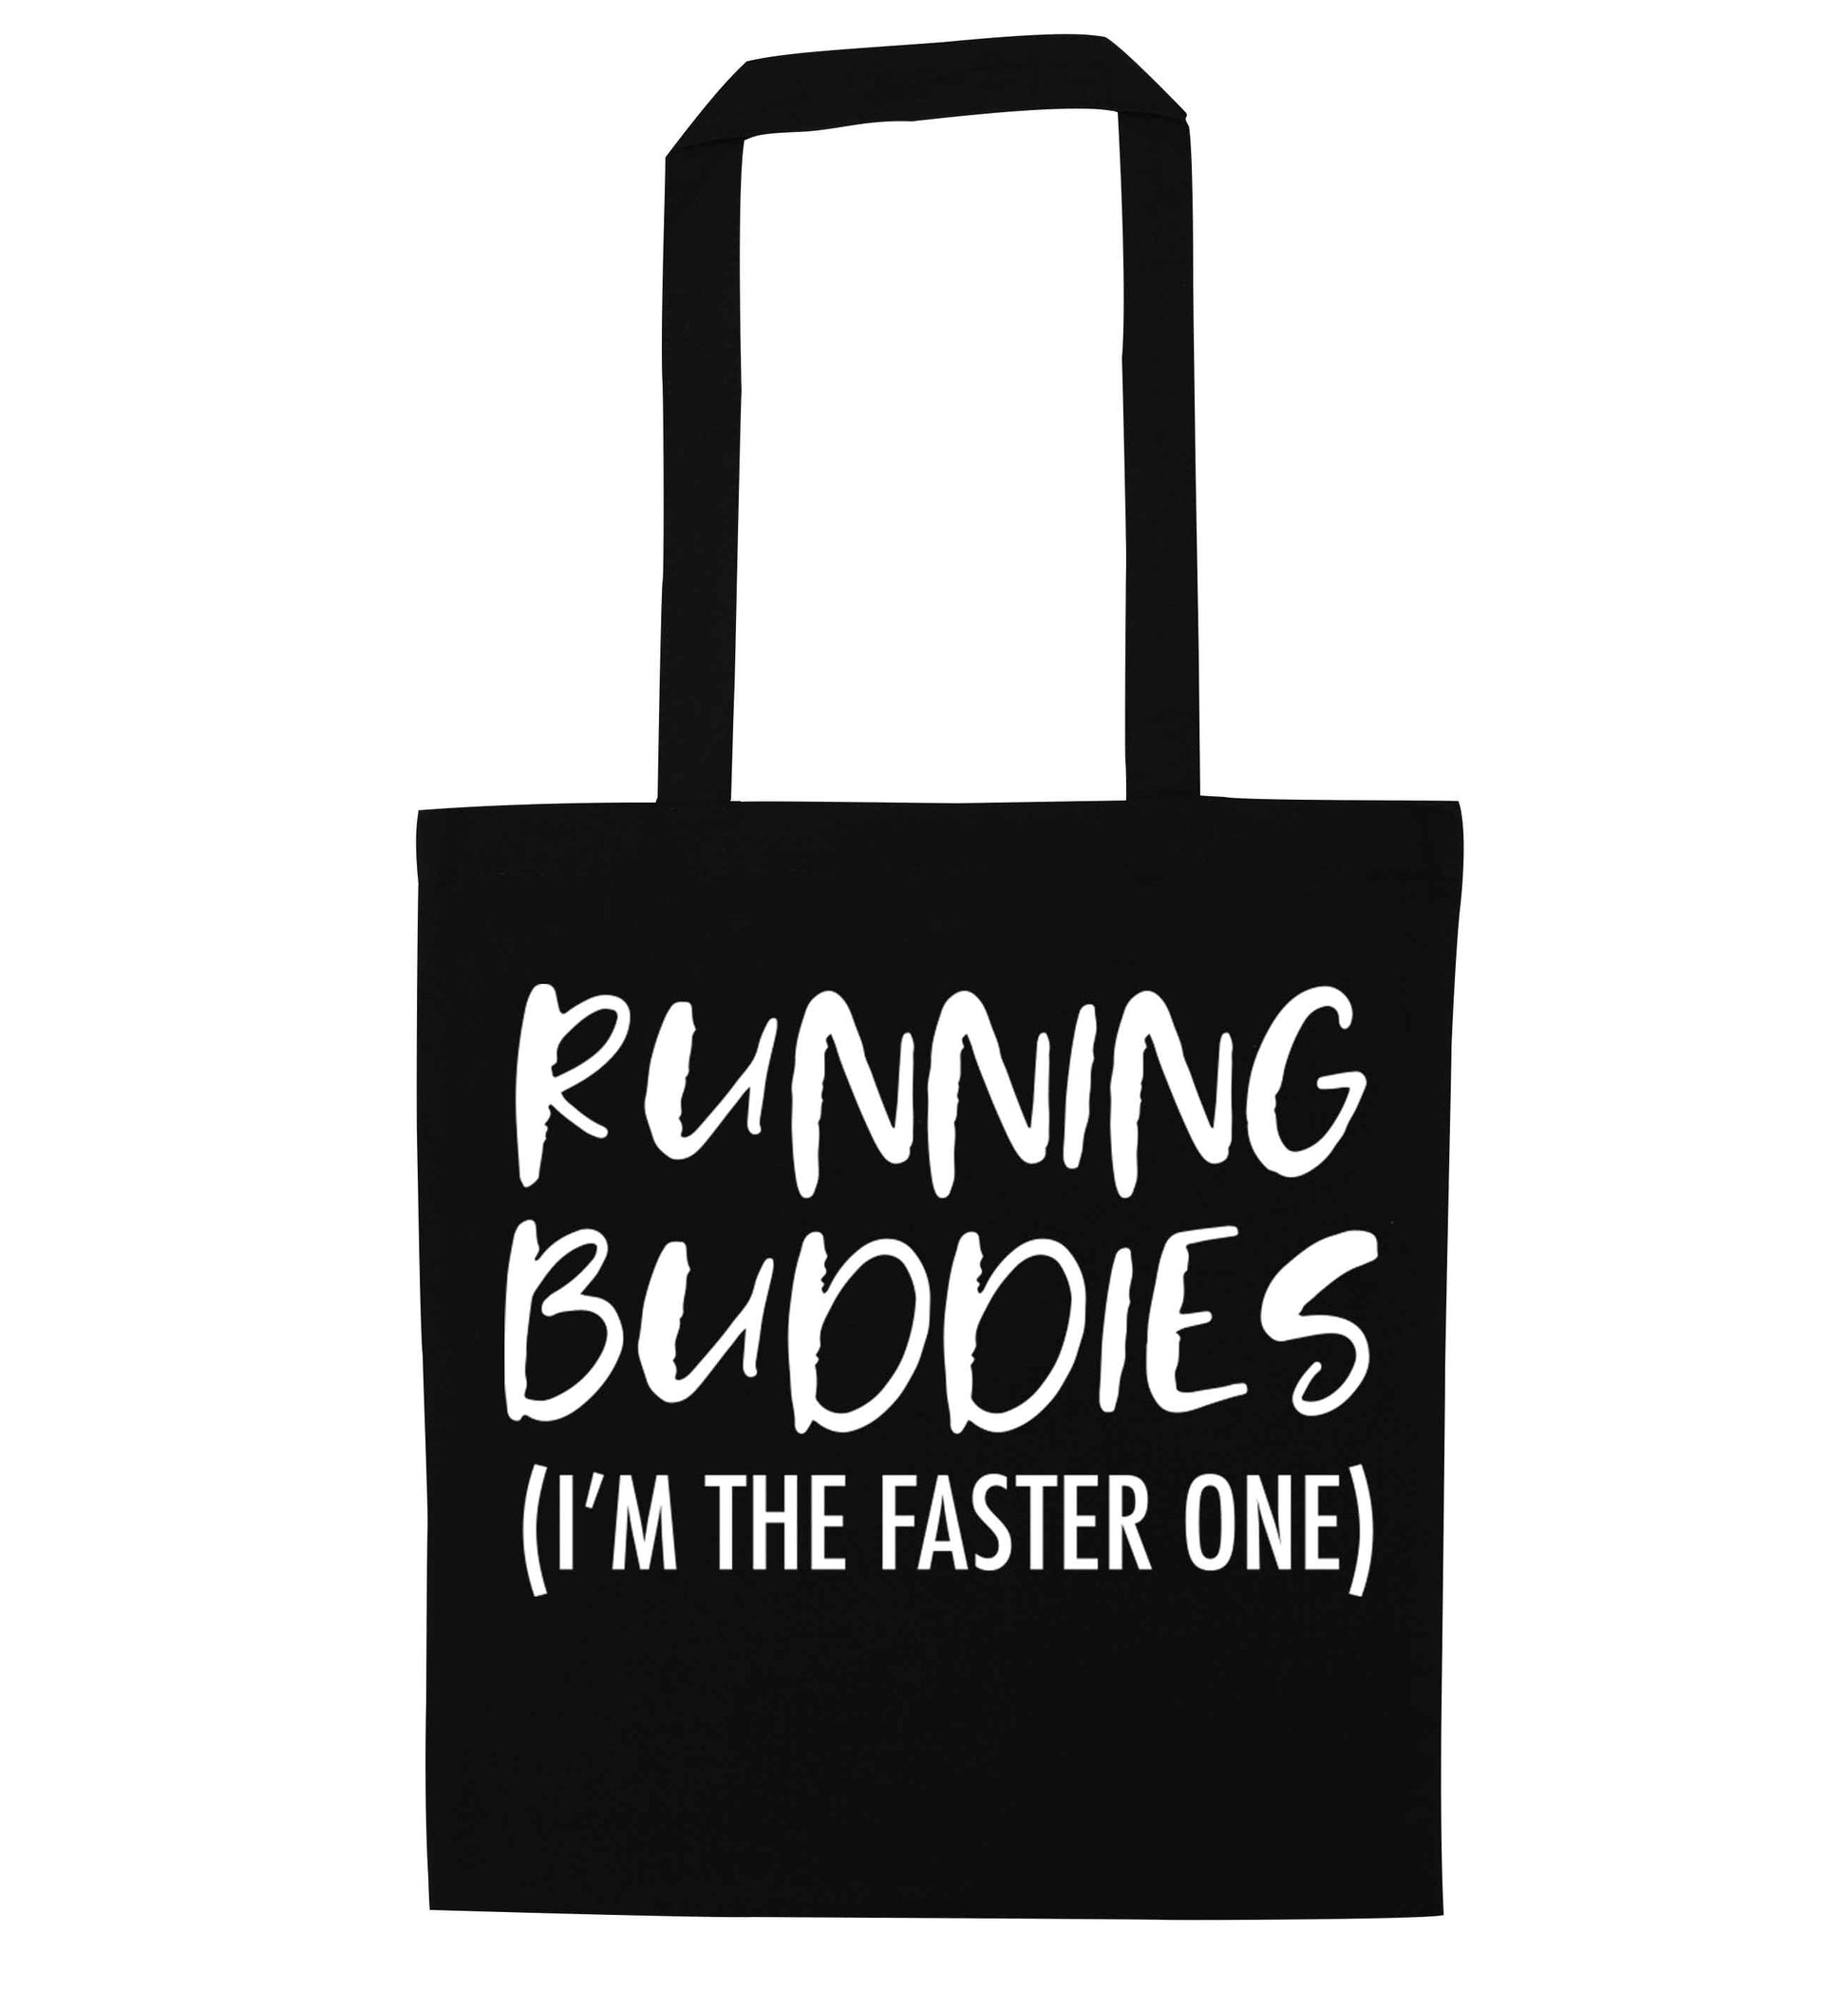 Running buddies (I'm the faster one) black tote bag